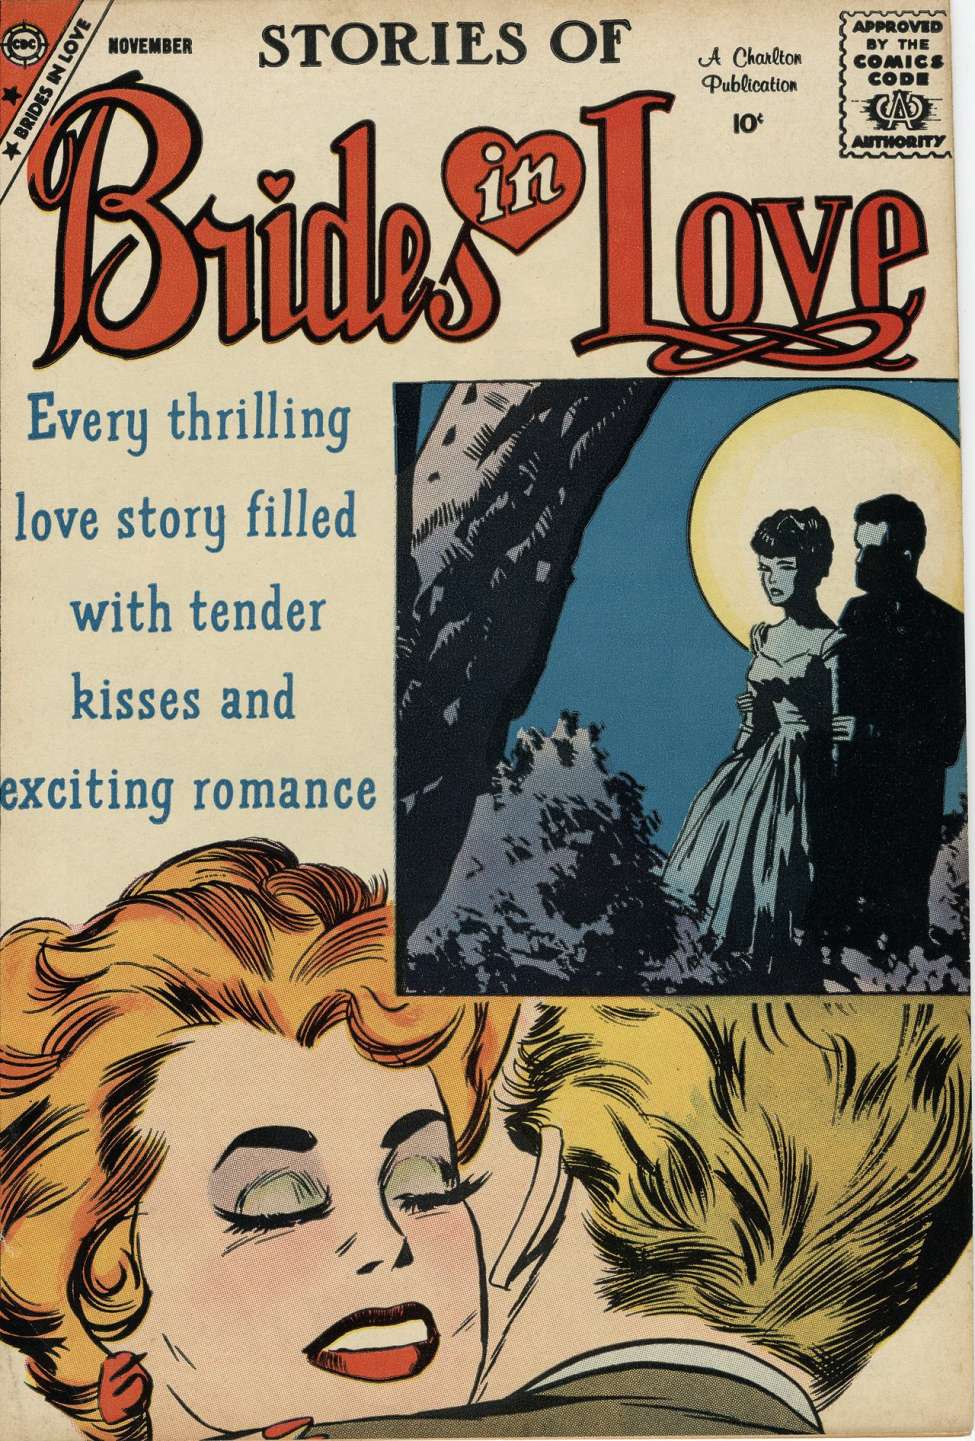 Book Cover For Brides in Love 15